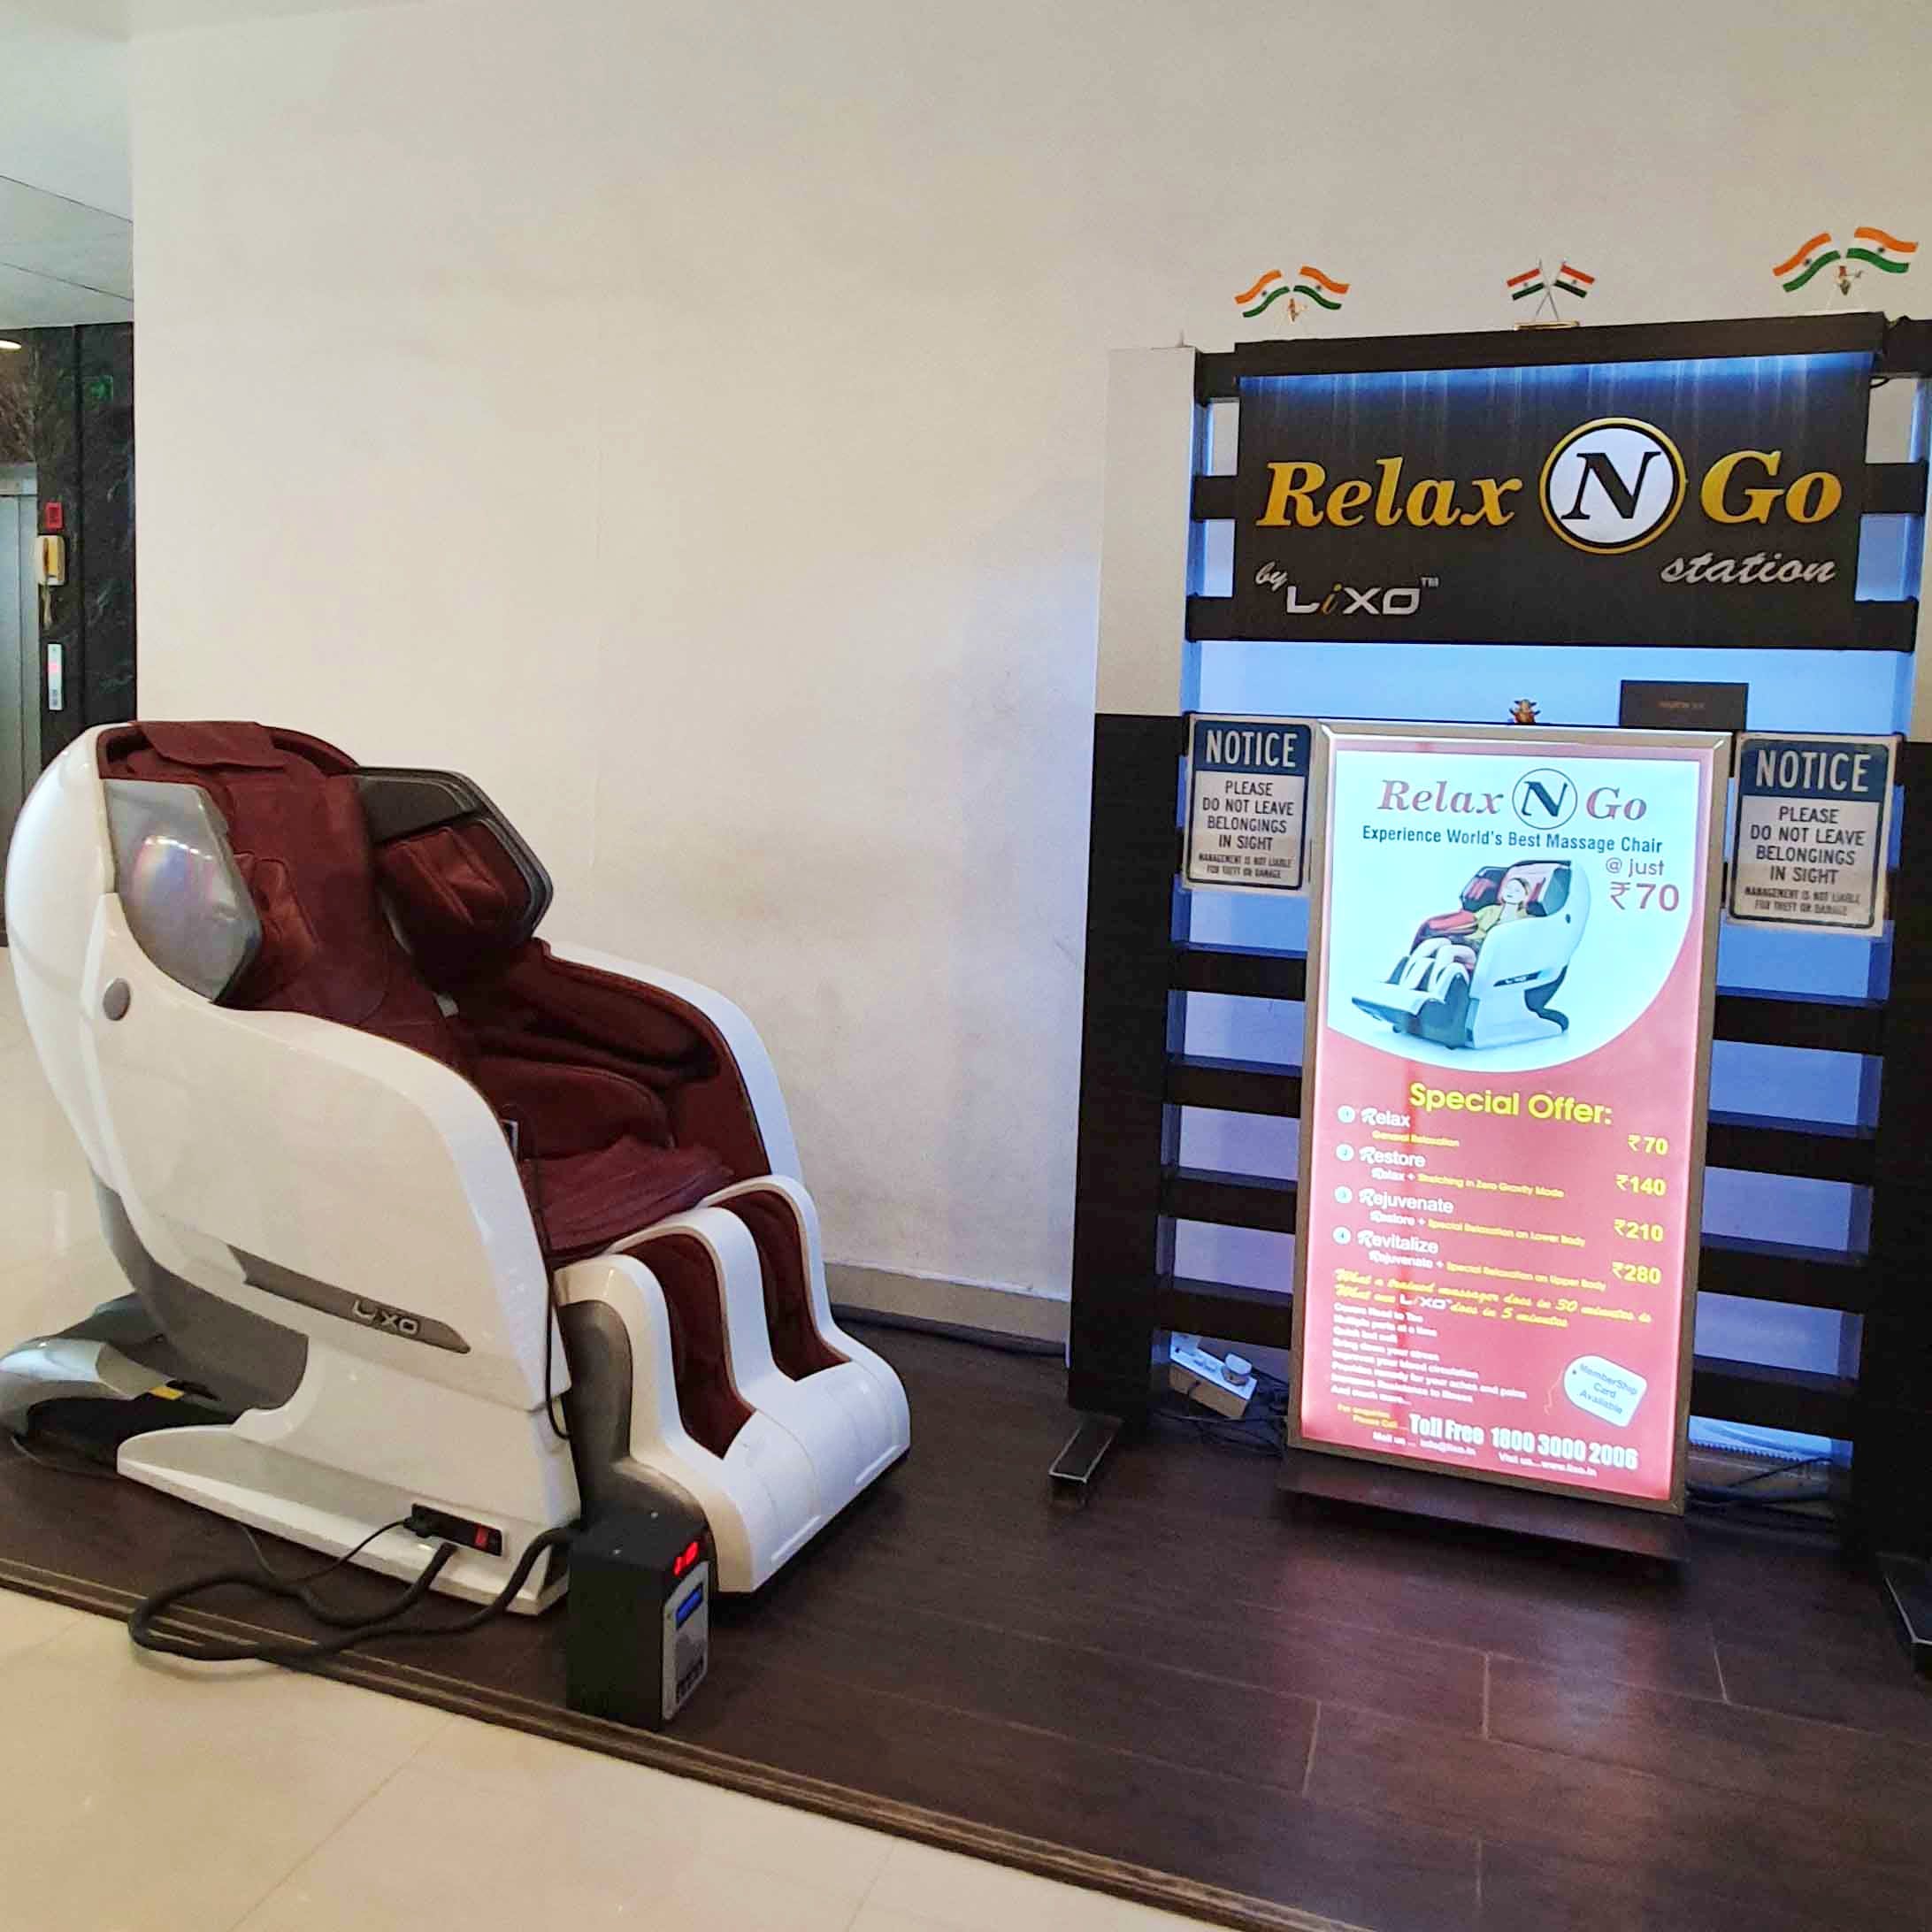 Massage chair,Product,Floor,Flooring,Room,Furniture,Chair,Wood,Personal care,Recliner